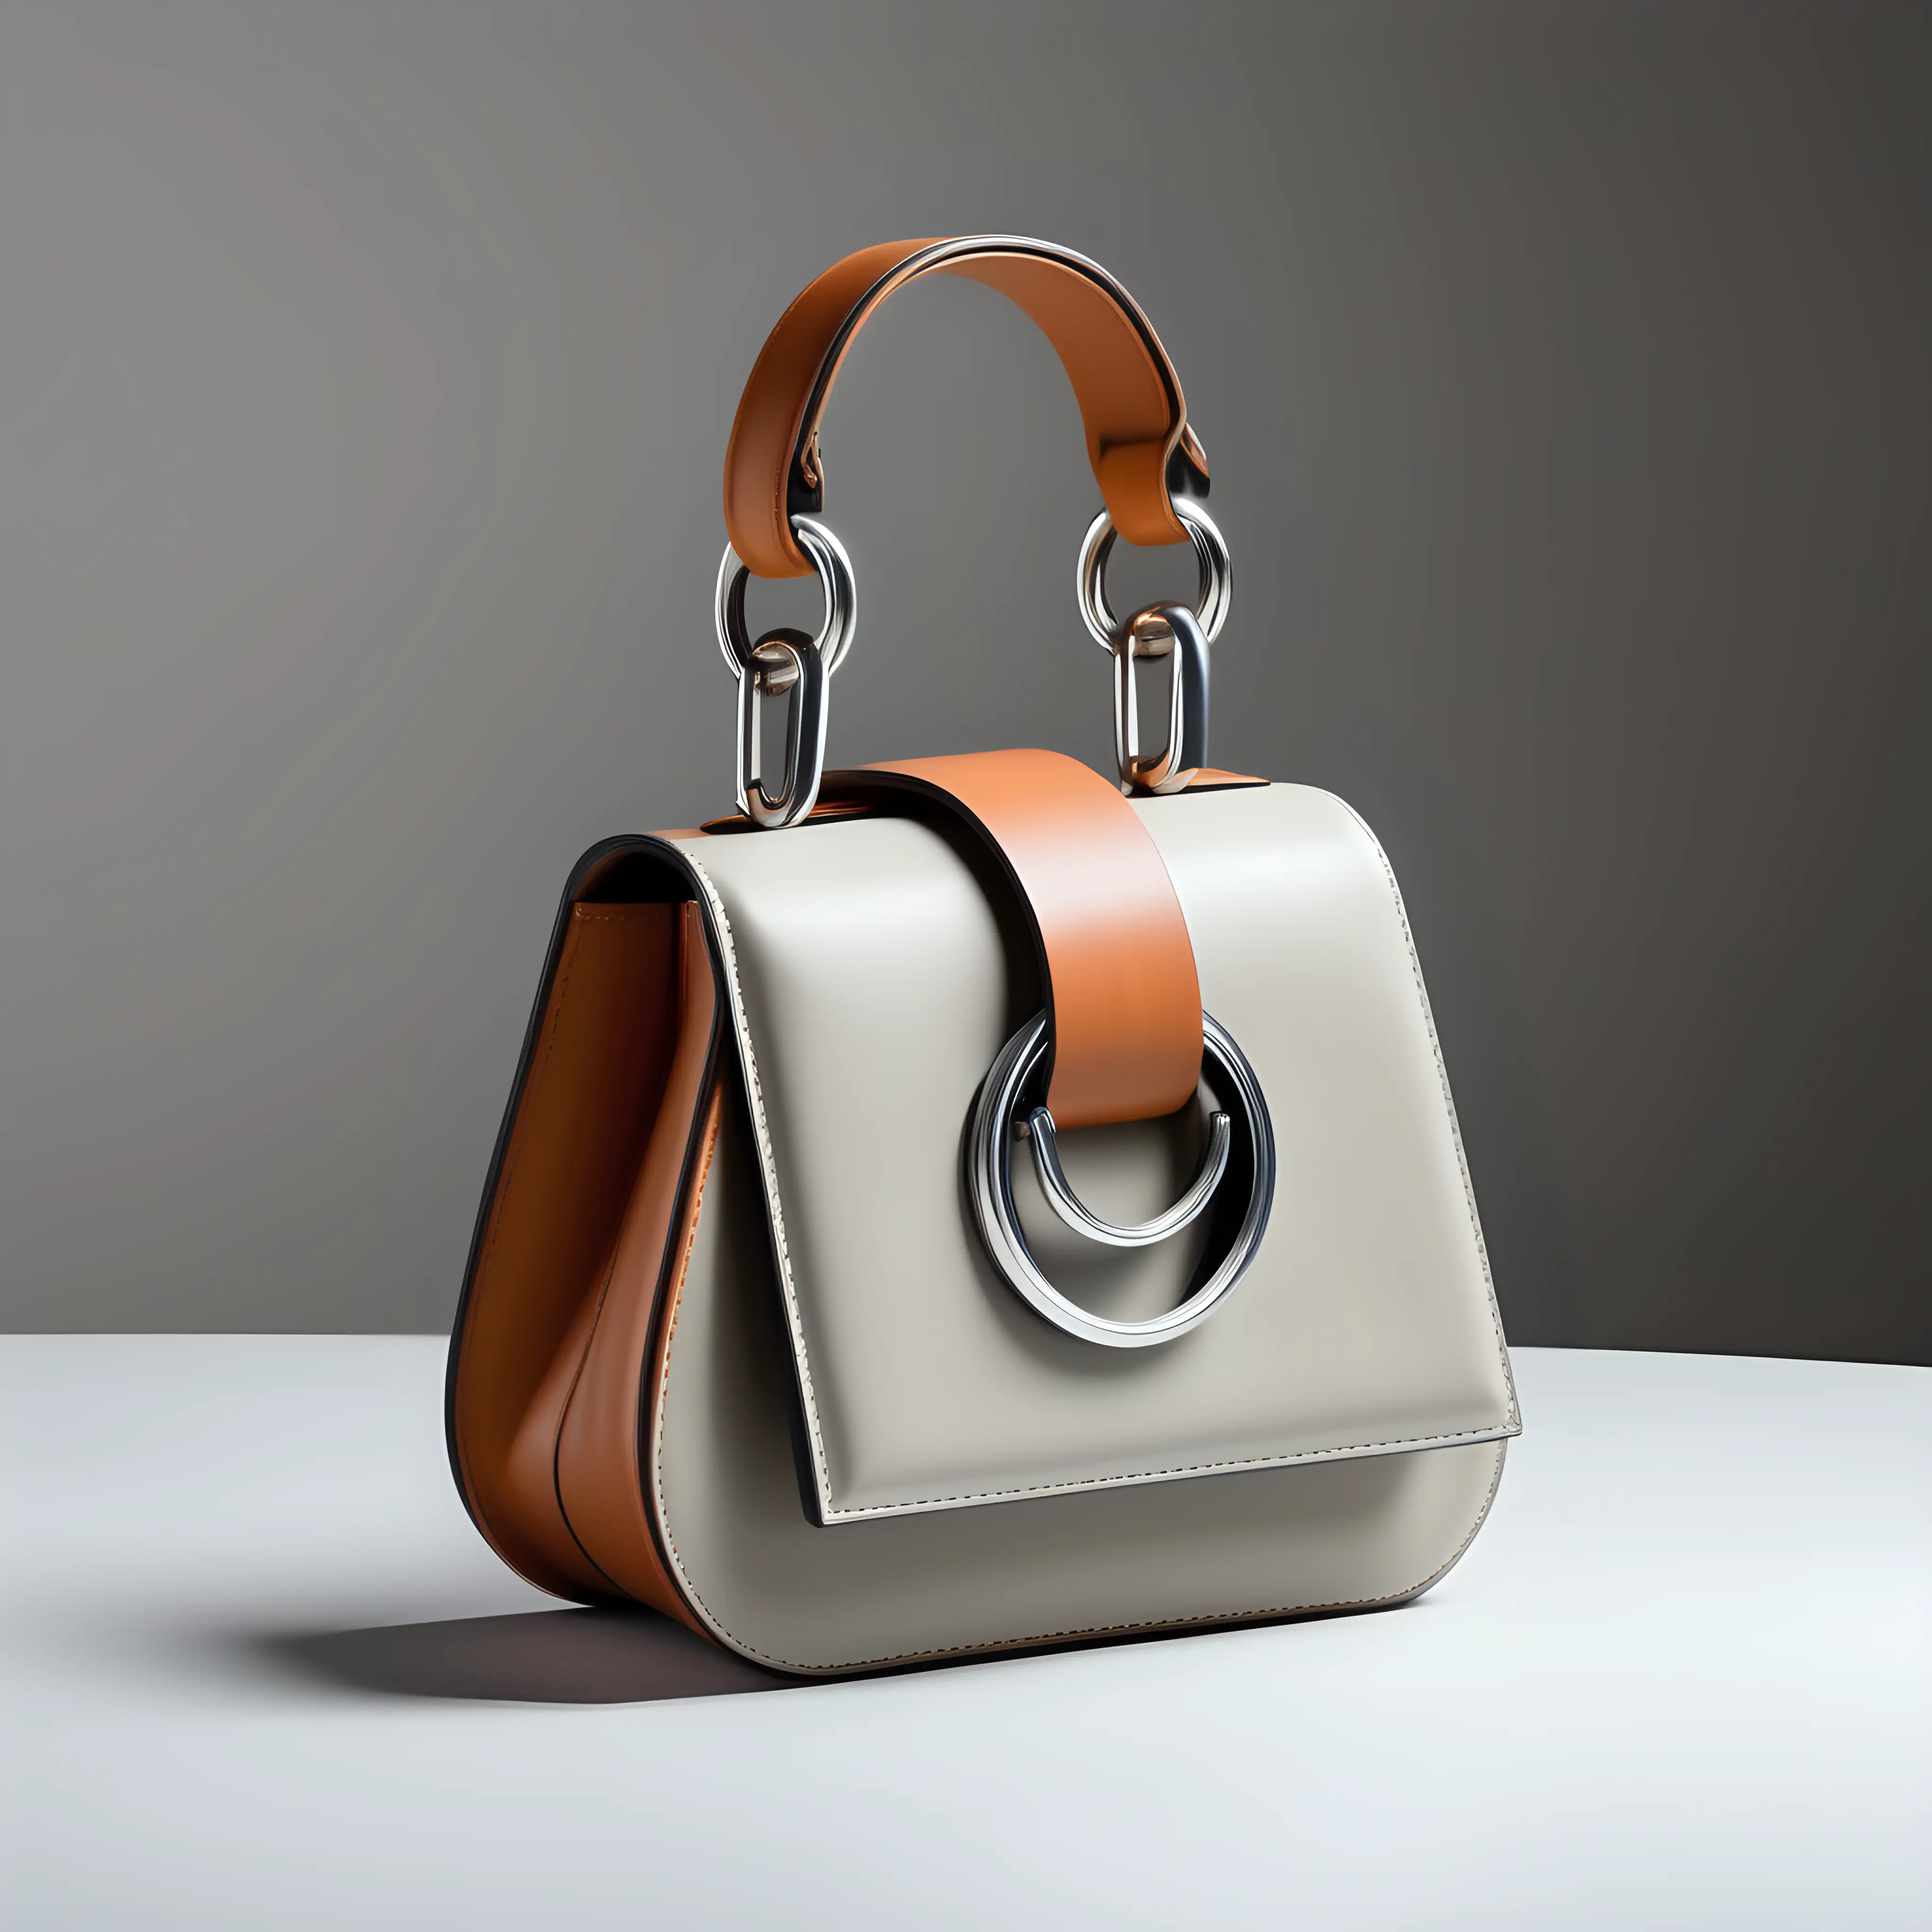 Luxury Small Leather Bag with Optical Illusion Design